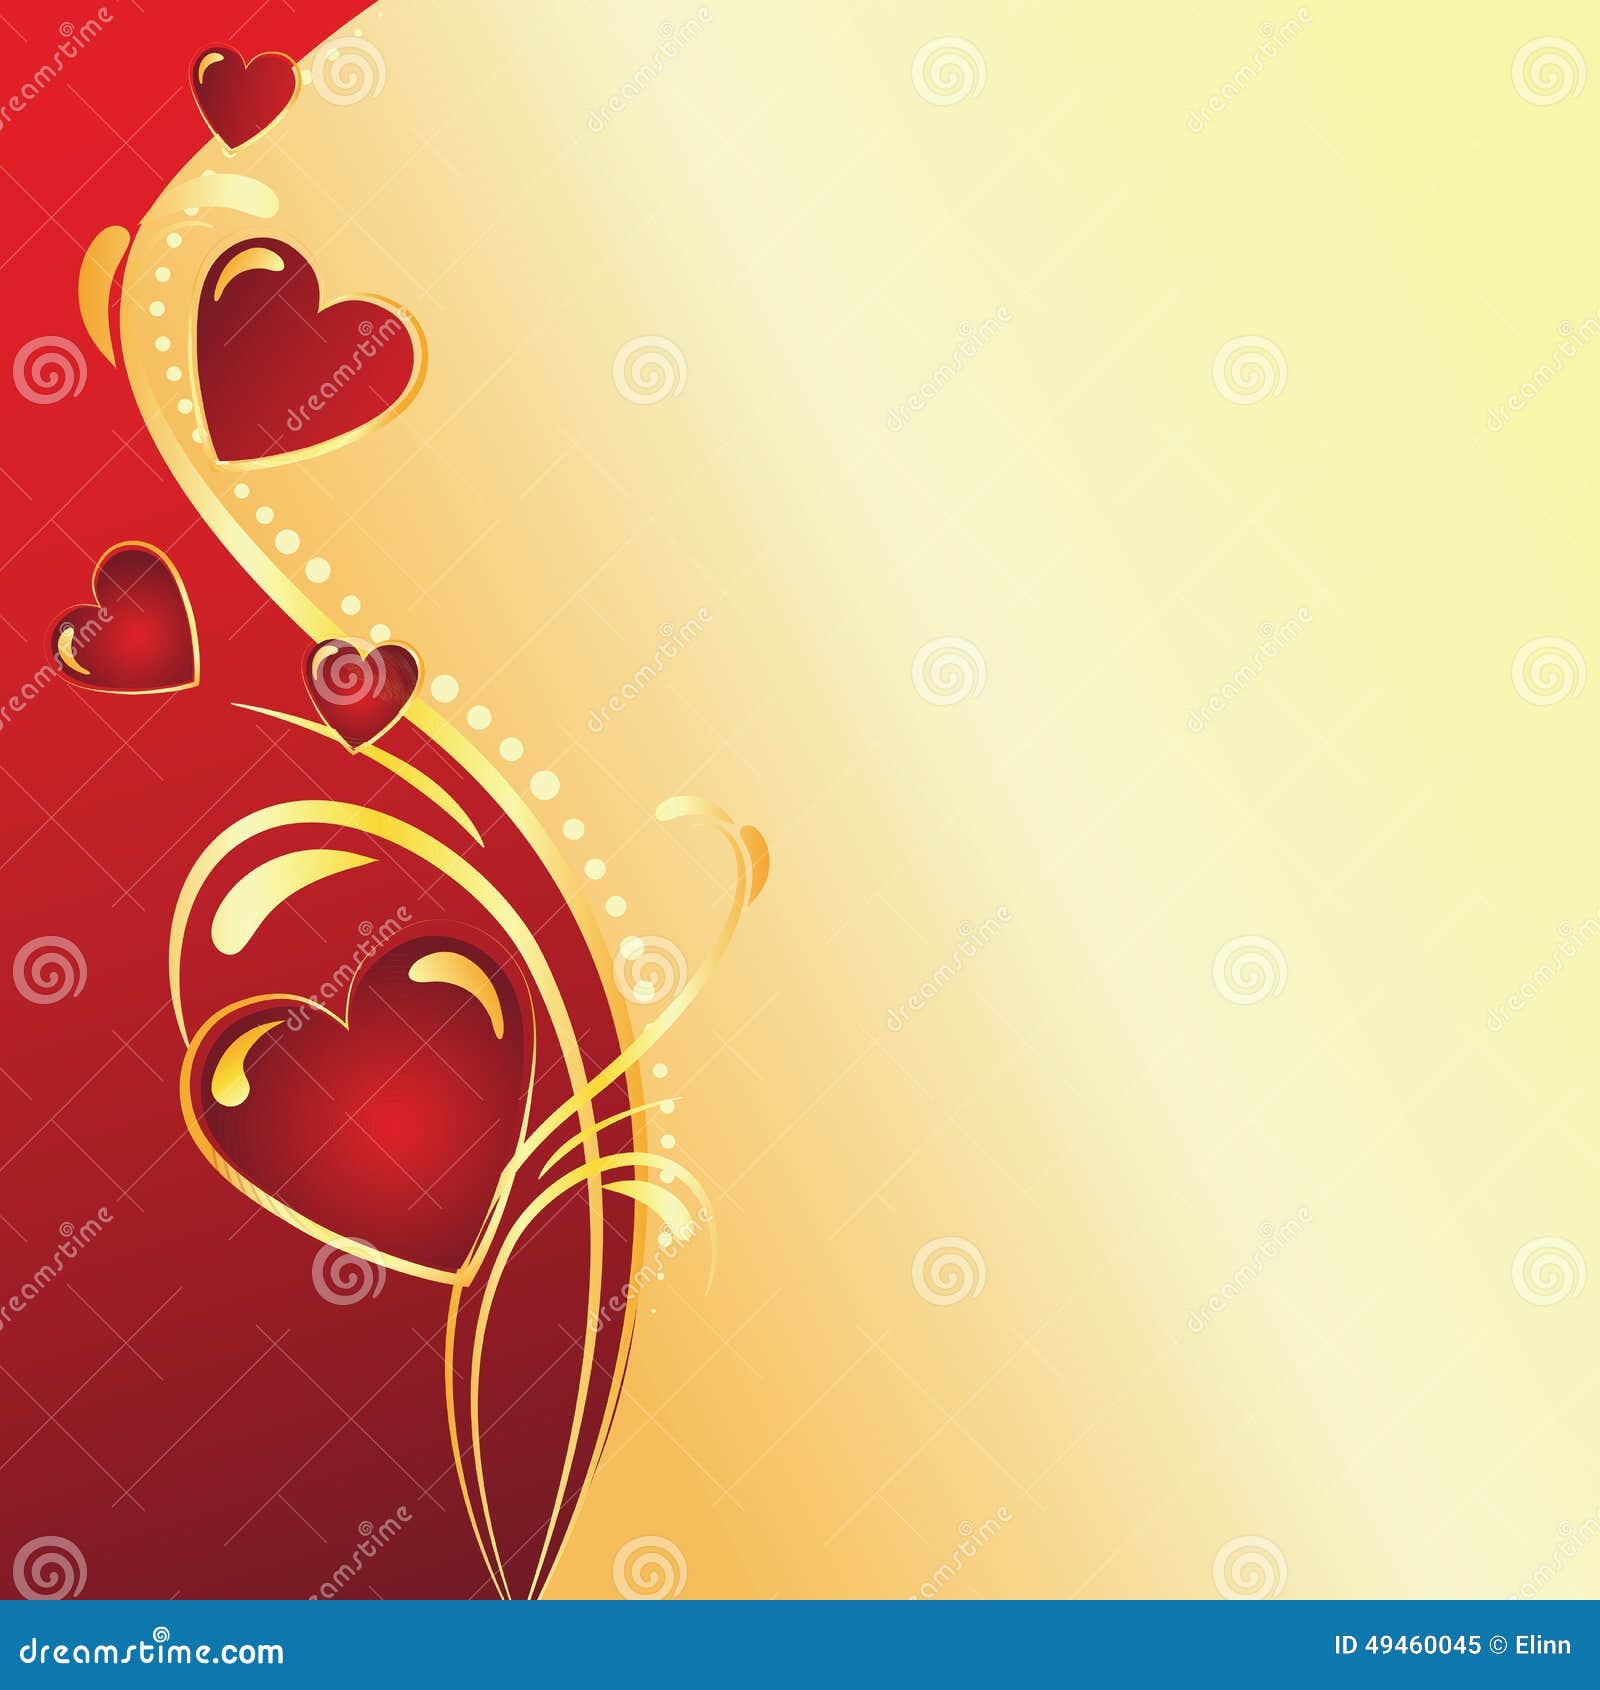 Valentine S Day Gold & Red Background Stock Vector - Illustration of ...